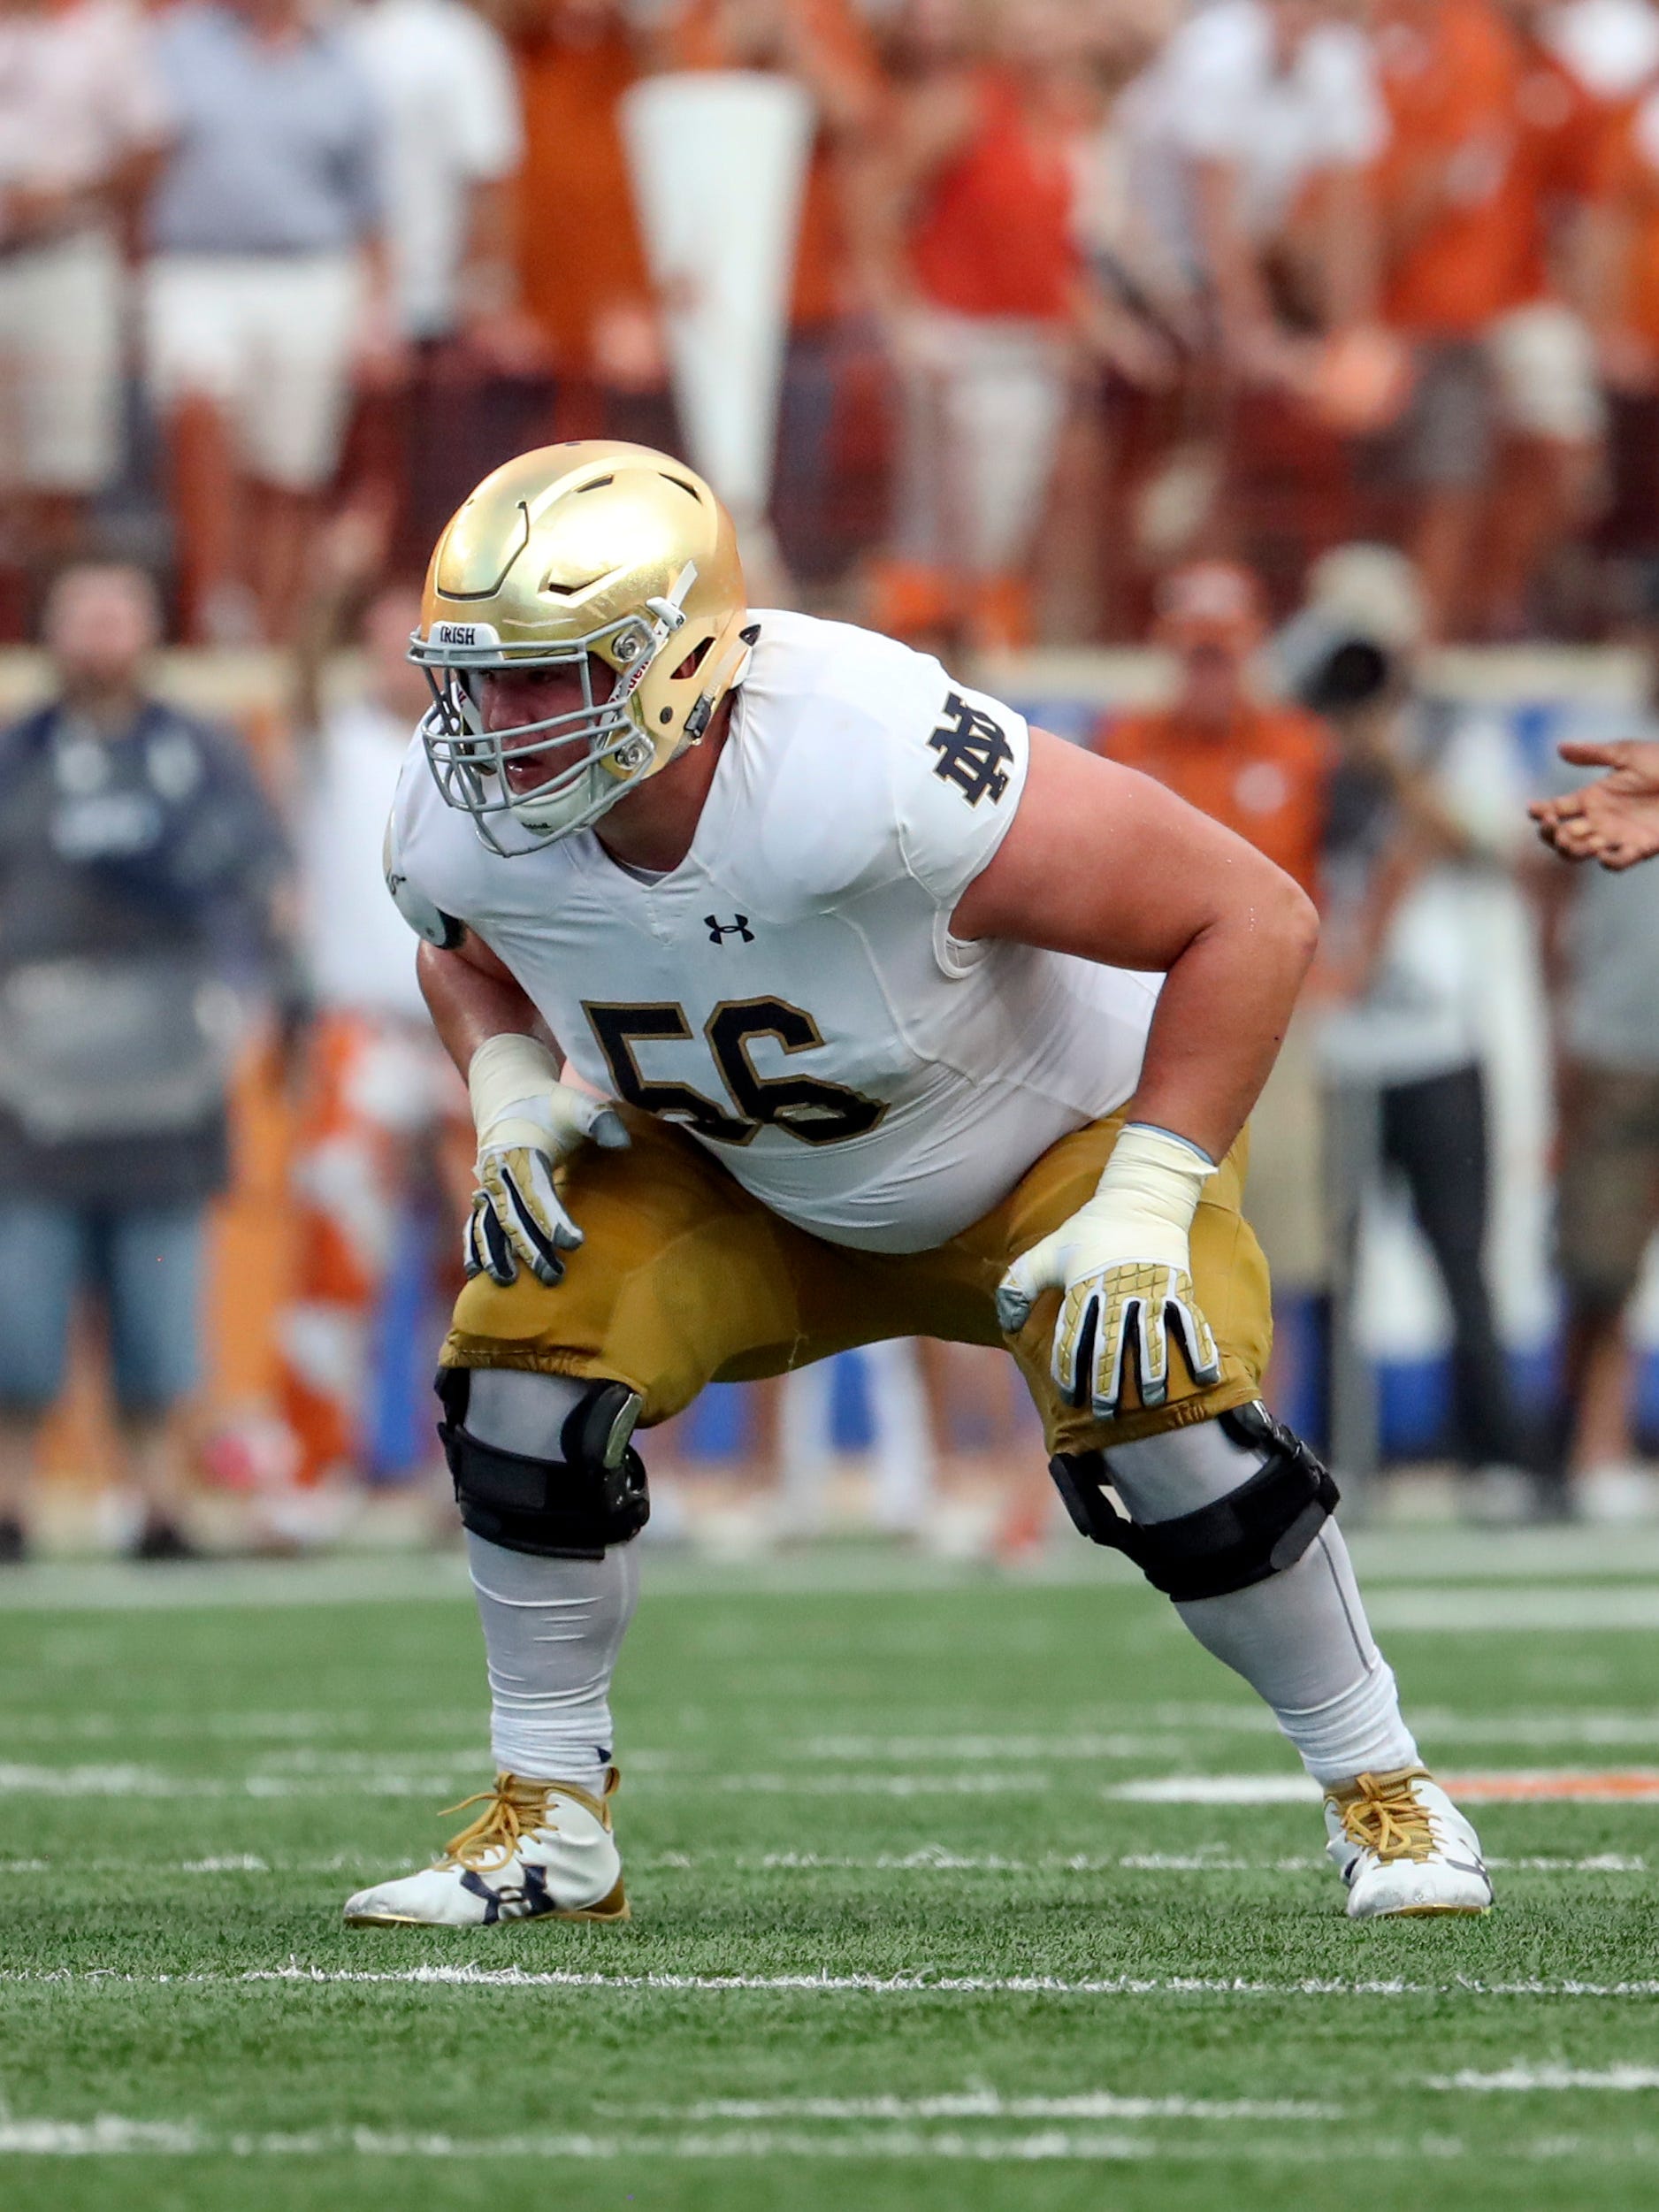 18 Nfl Draft Live Blog Colts Select Lineman Quenton Nelson As 1st Round Is Complete